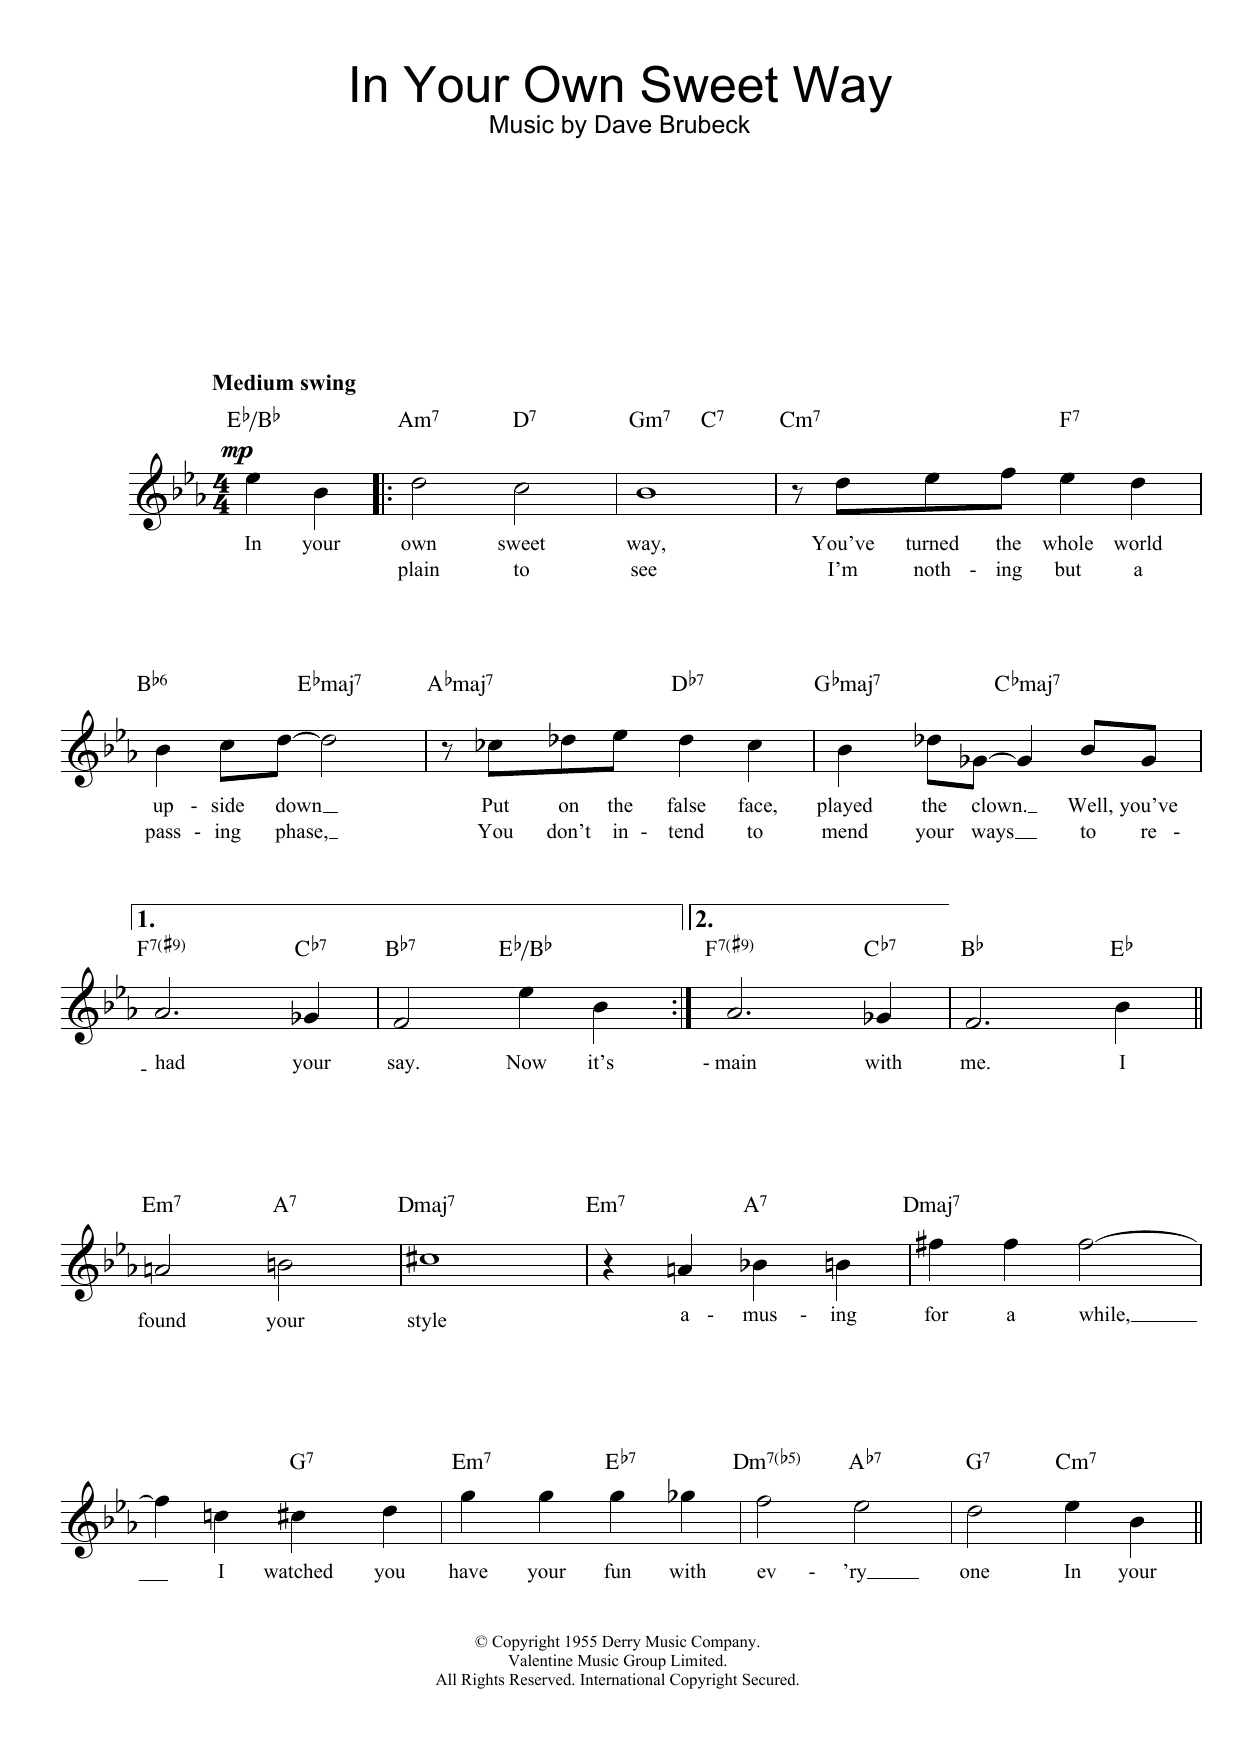 Dave Brubeck In Your Own Sweet Way sheet music notes printable PDF score